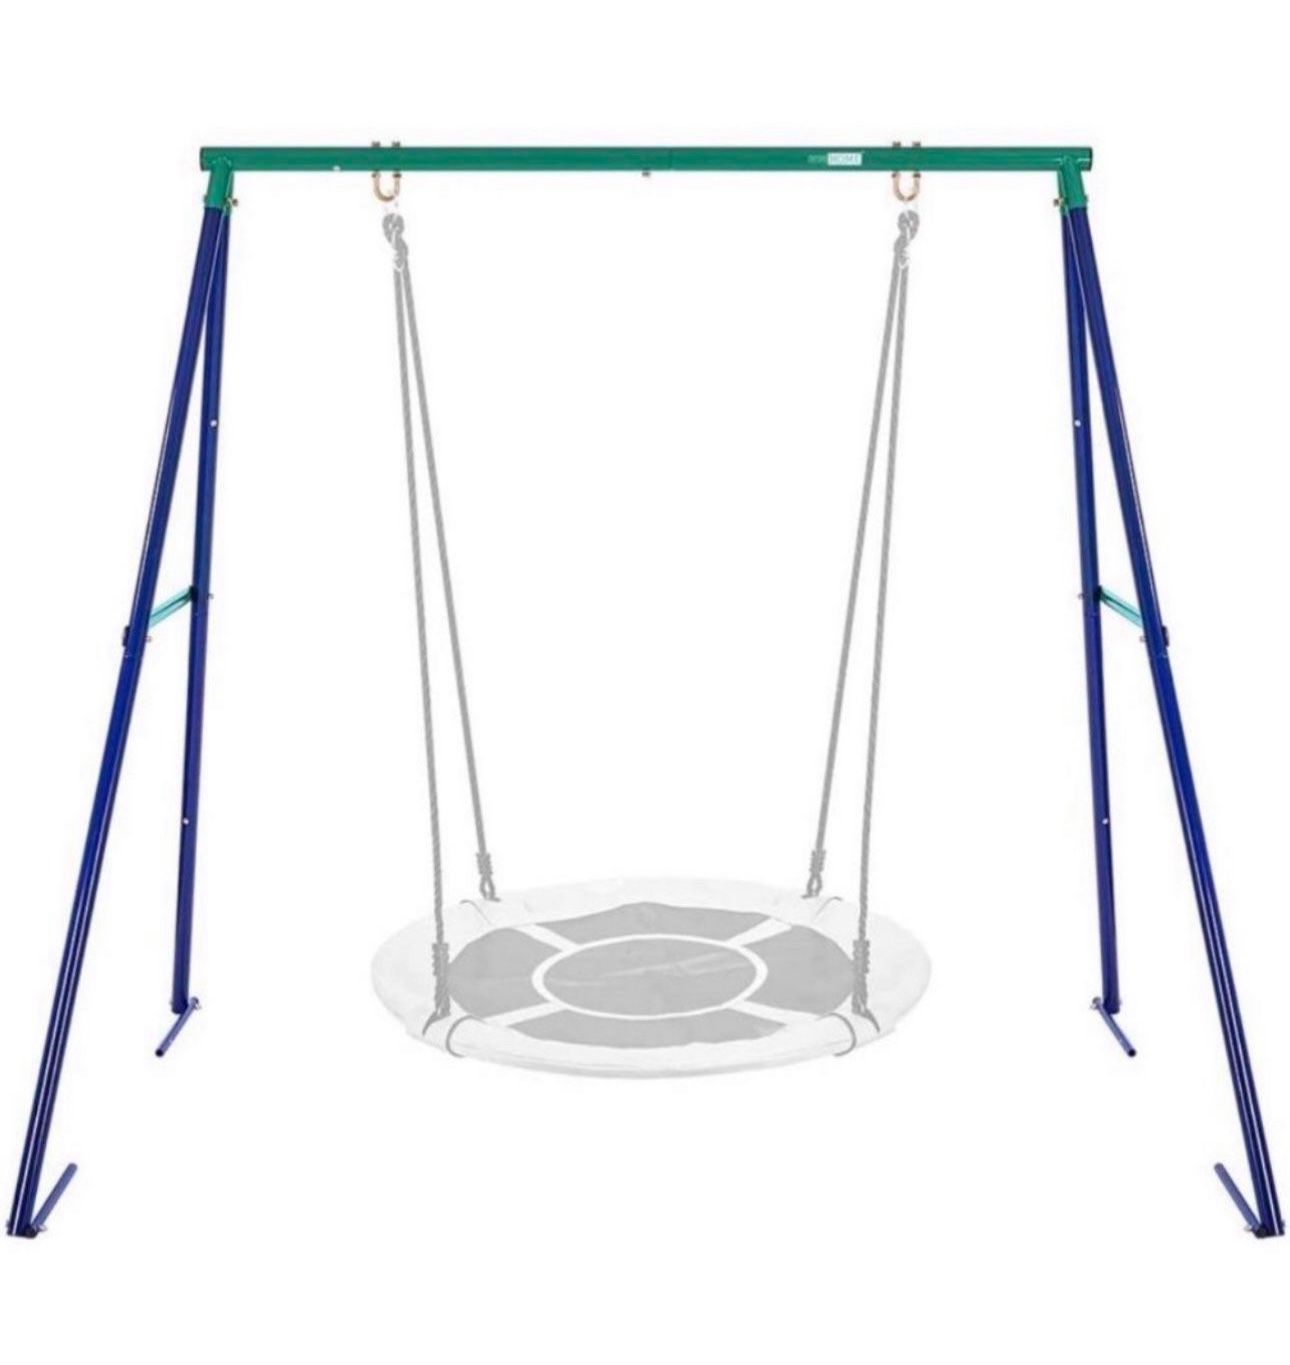 Clearance Metal Frame Full Steel Swing Stand, Hold up to 440 lbs, Saucer Swing NOT Included